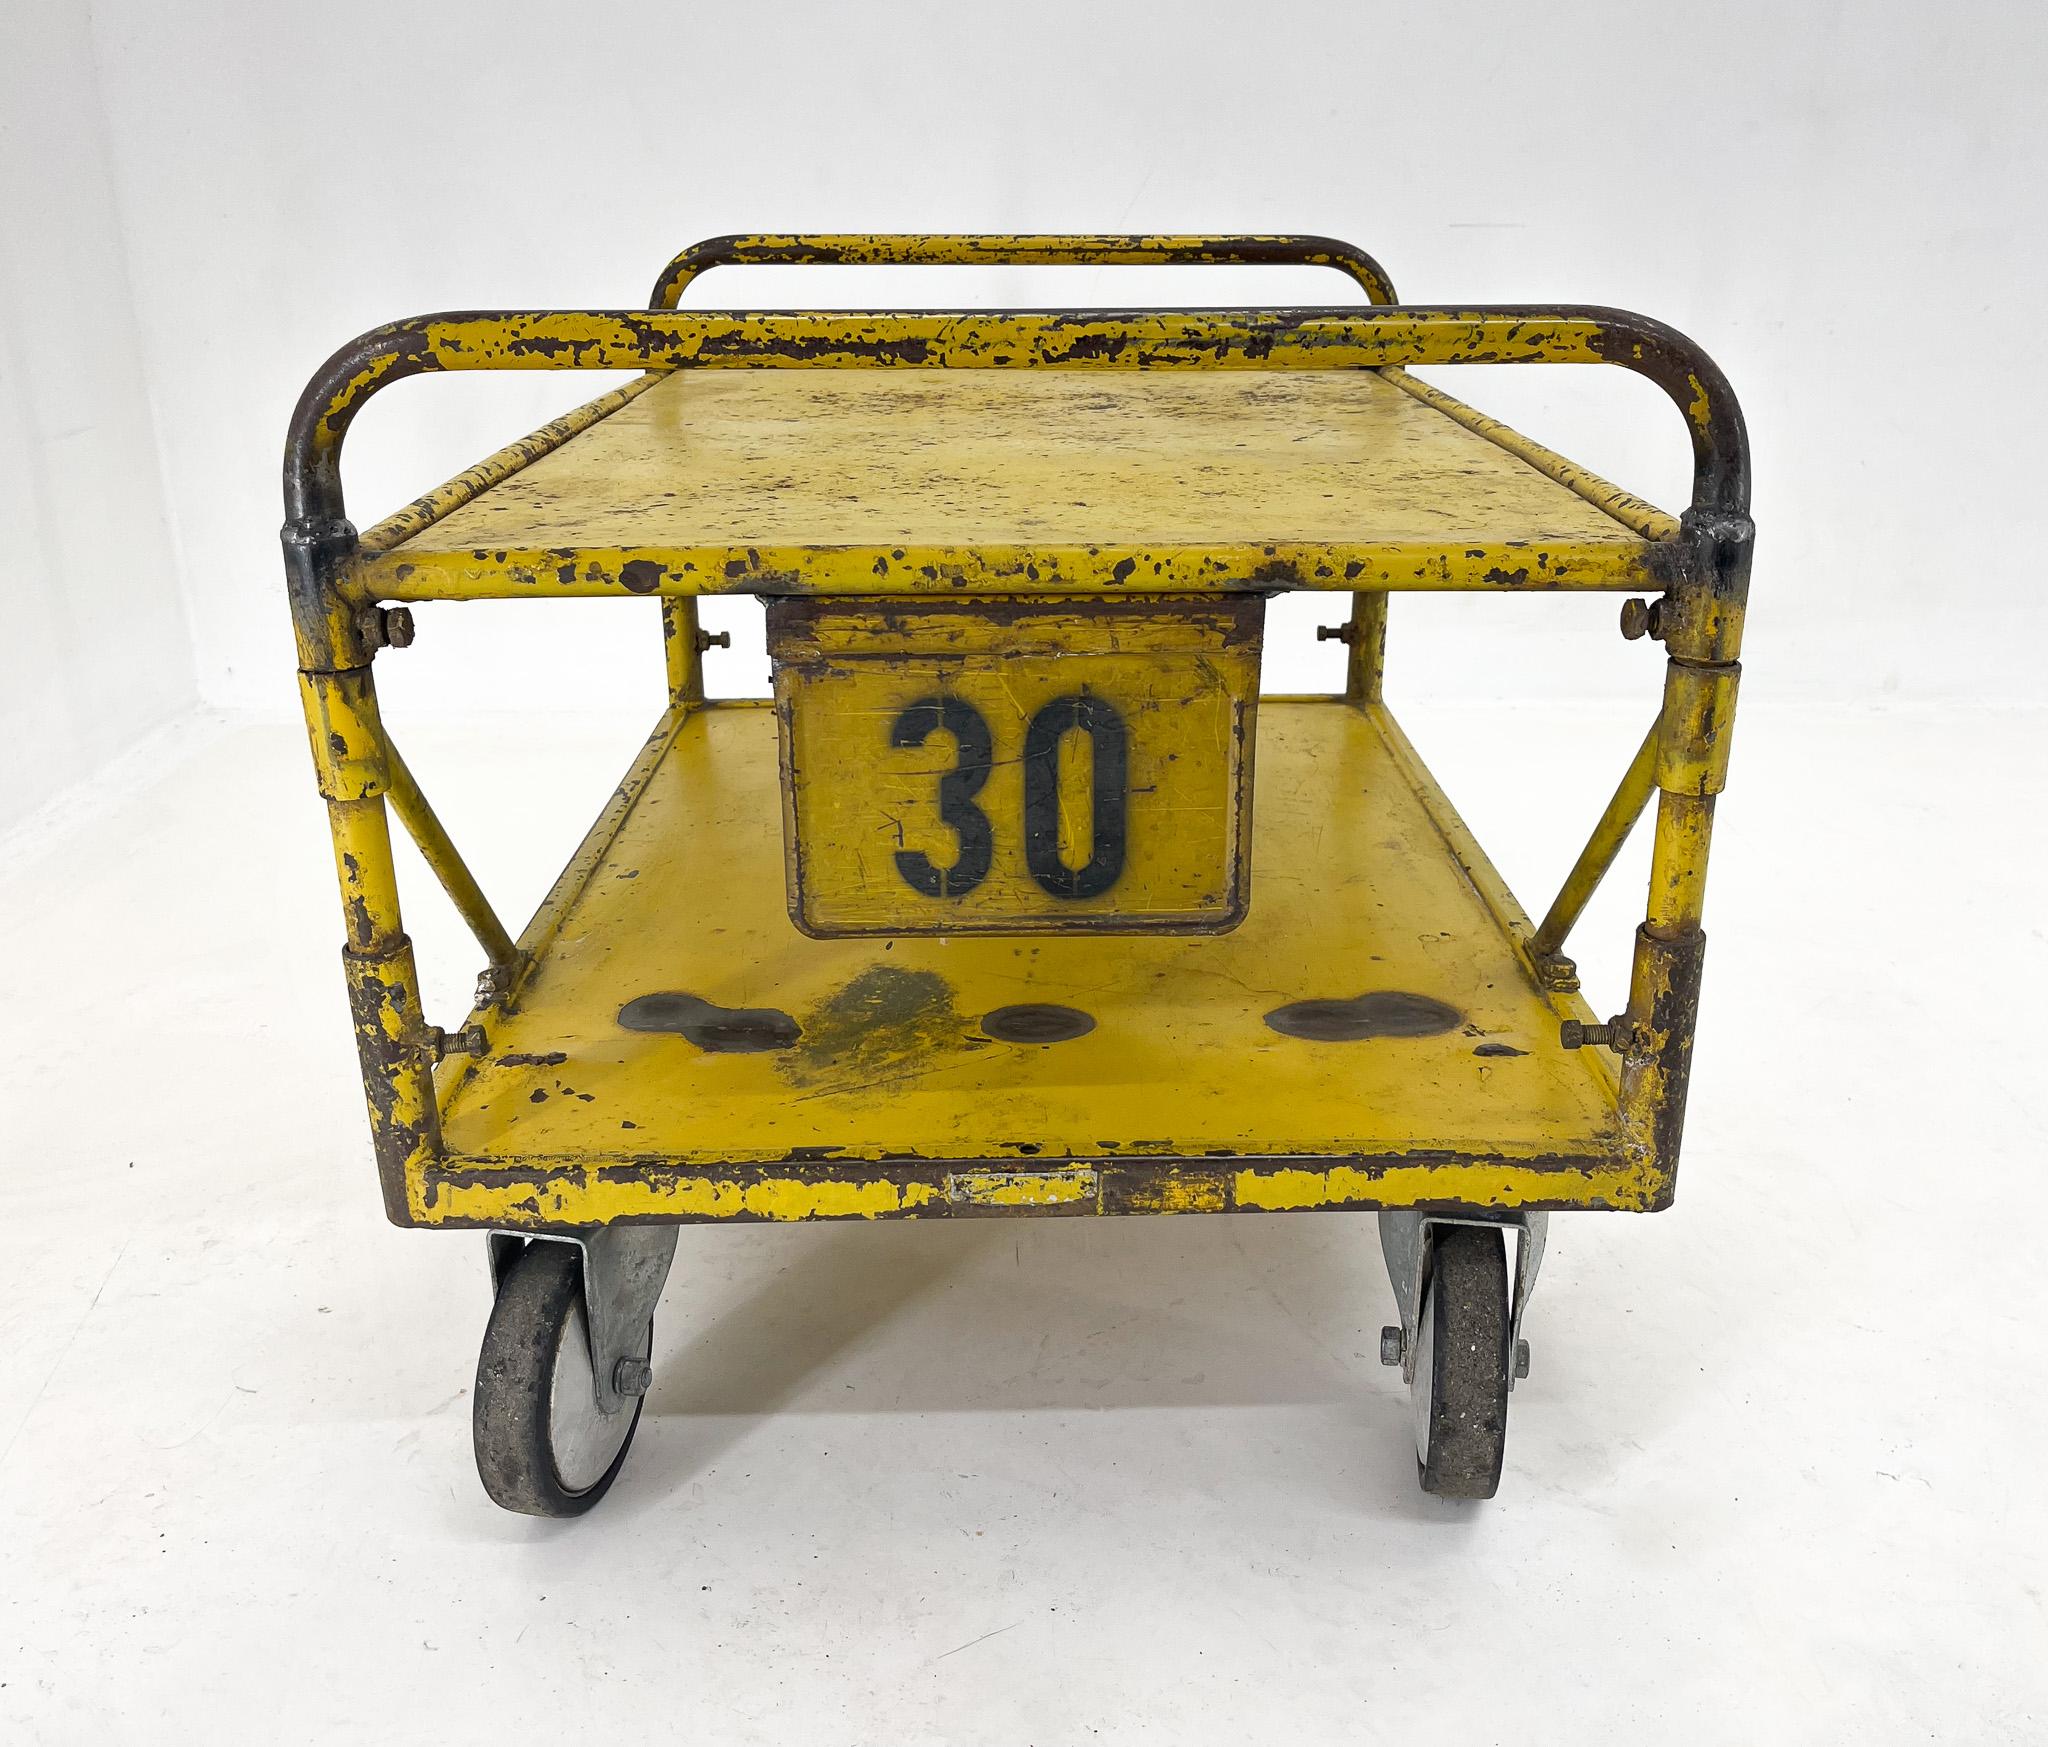 Industrial trolley with original yellow paint. Salvaged from a jewellery factory in former Czechoslovakia. Can be used as an original coffee table, side table or whatever your fancy. An original piece that will brighten up any interior.